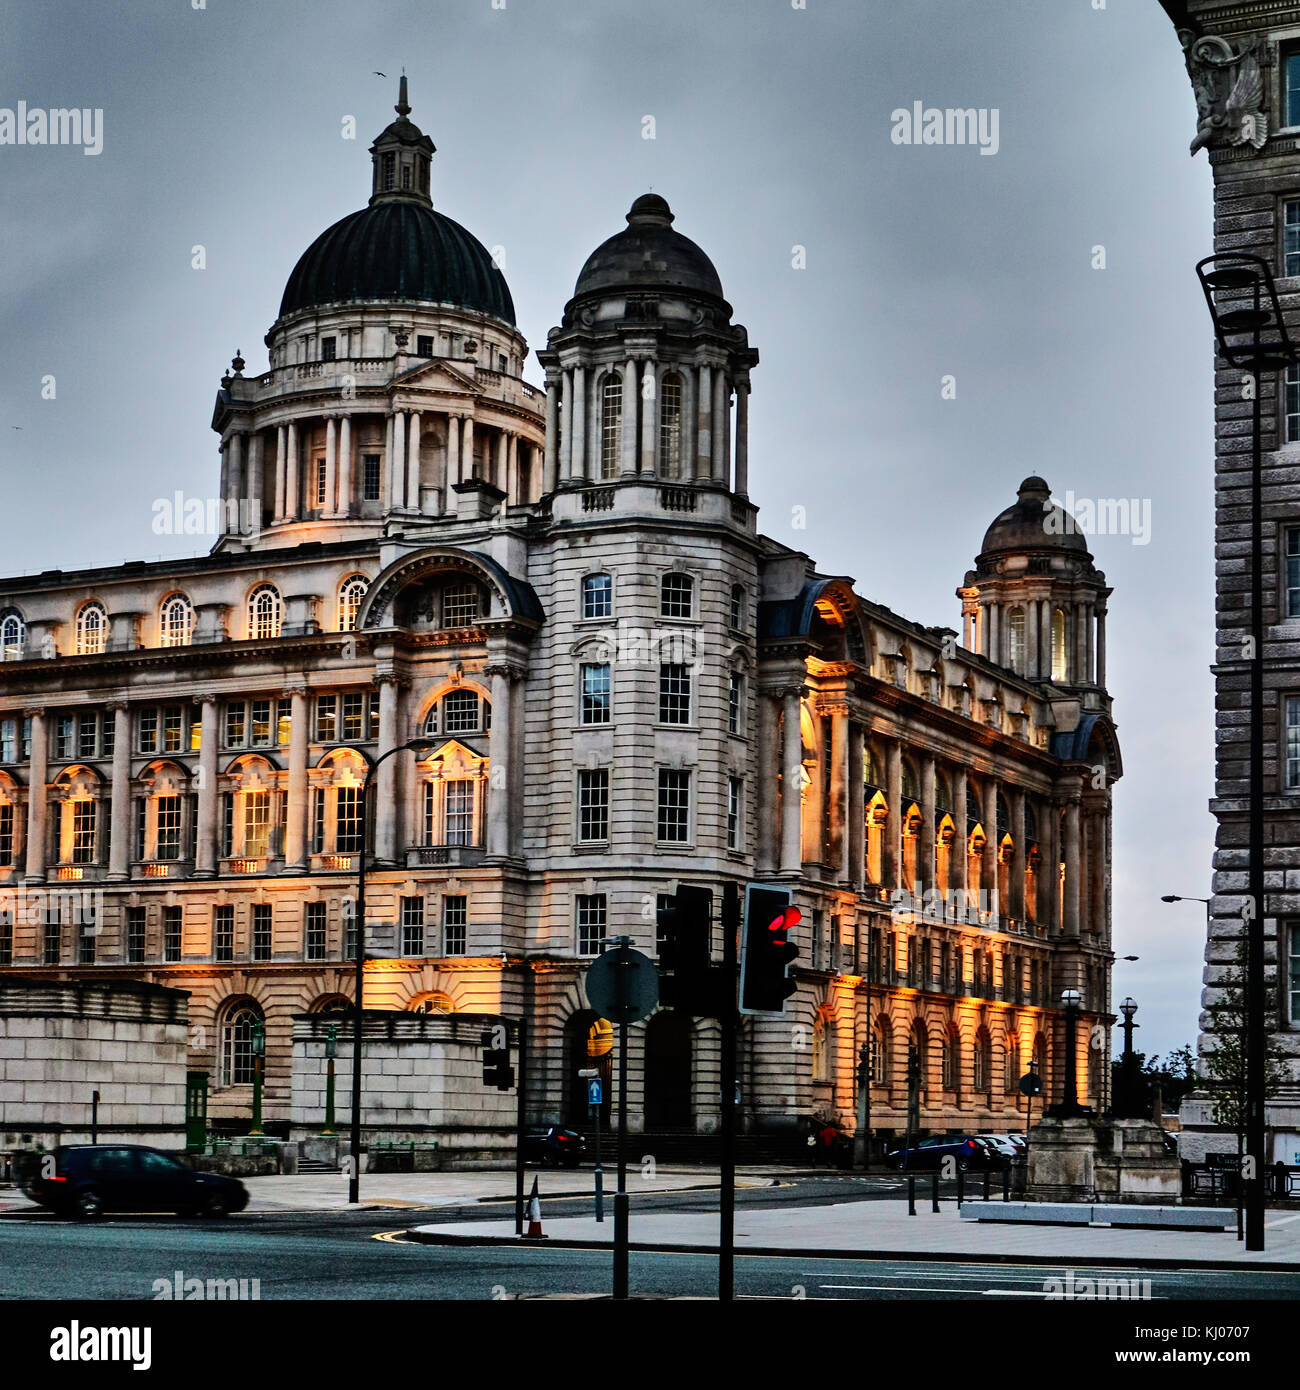 The Three Graces, The Royal Liver Building, The Cunard Building and the Port of Liverpool Building, take centre stage in the Liverpool Maritime Mercantile City UNESCO World Heritage Site.(multipul images stitched). Stock Photo